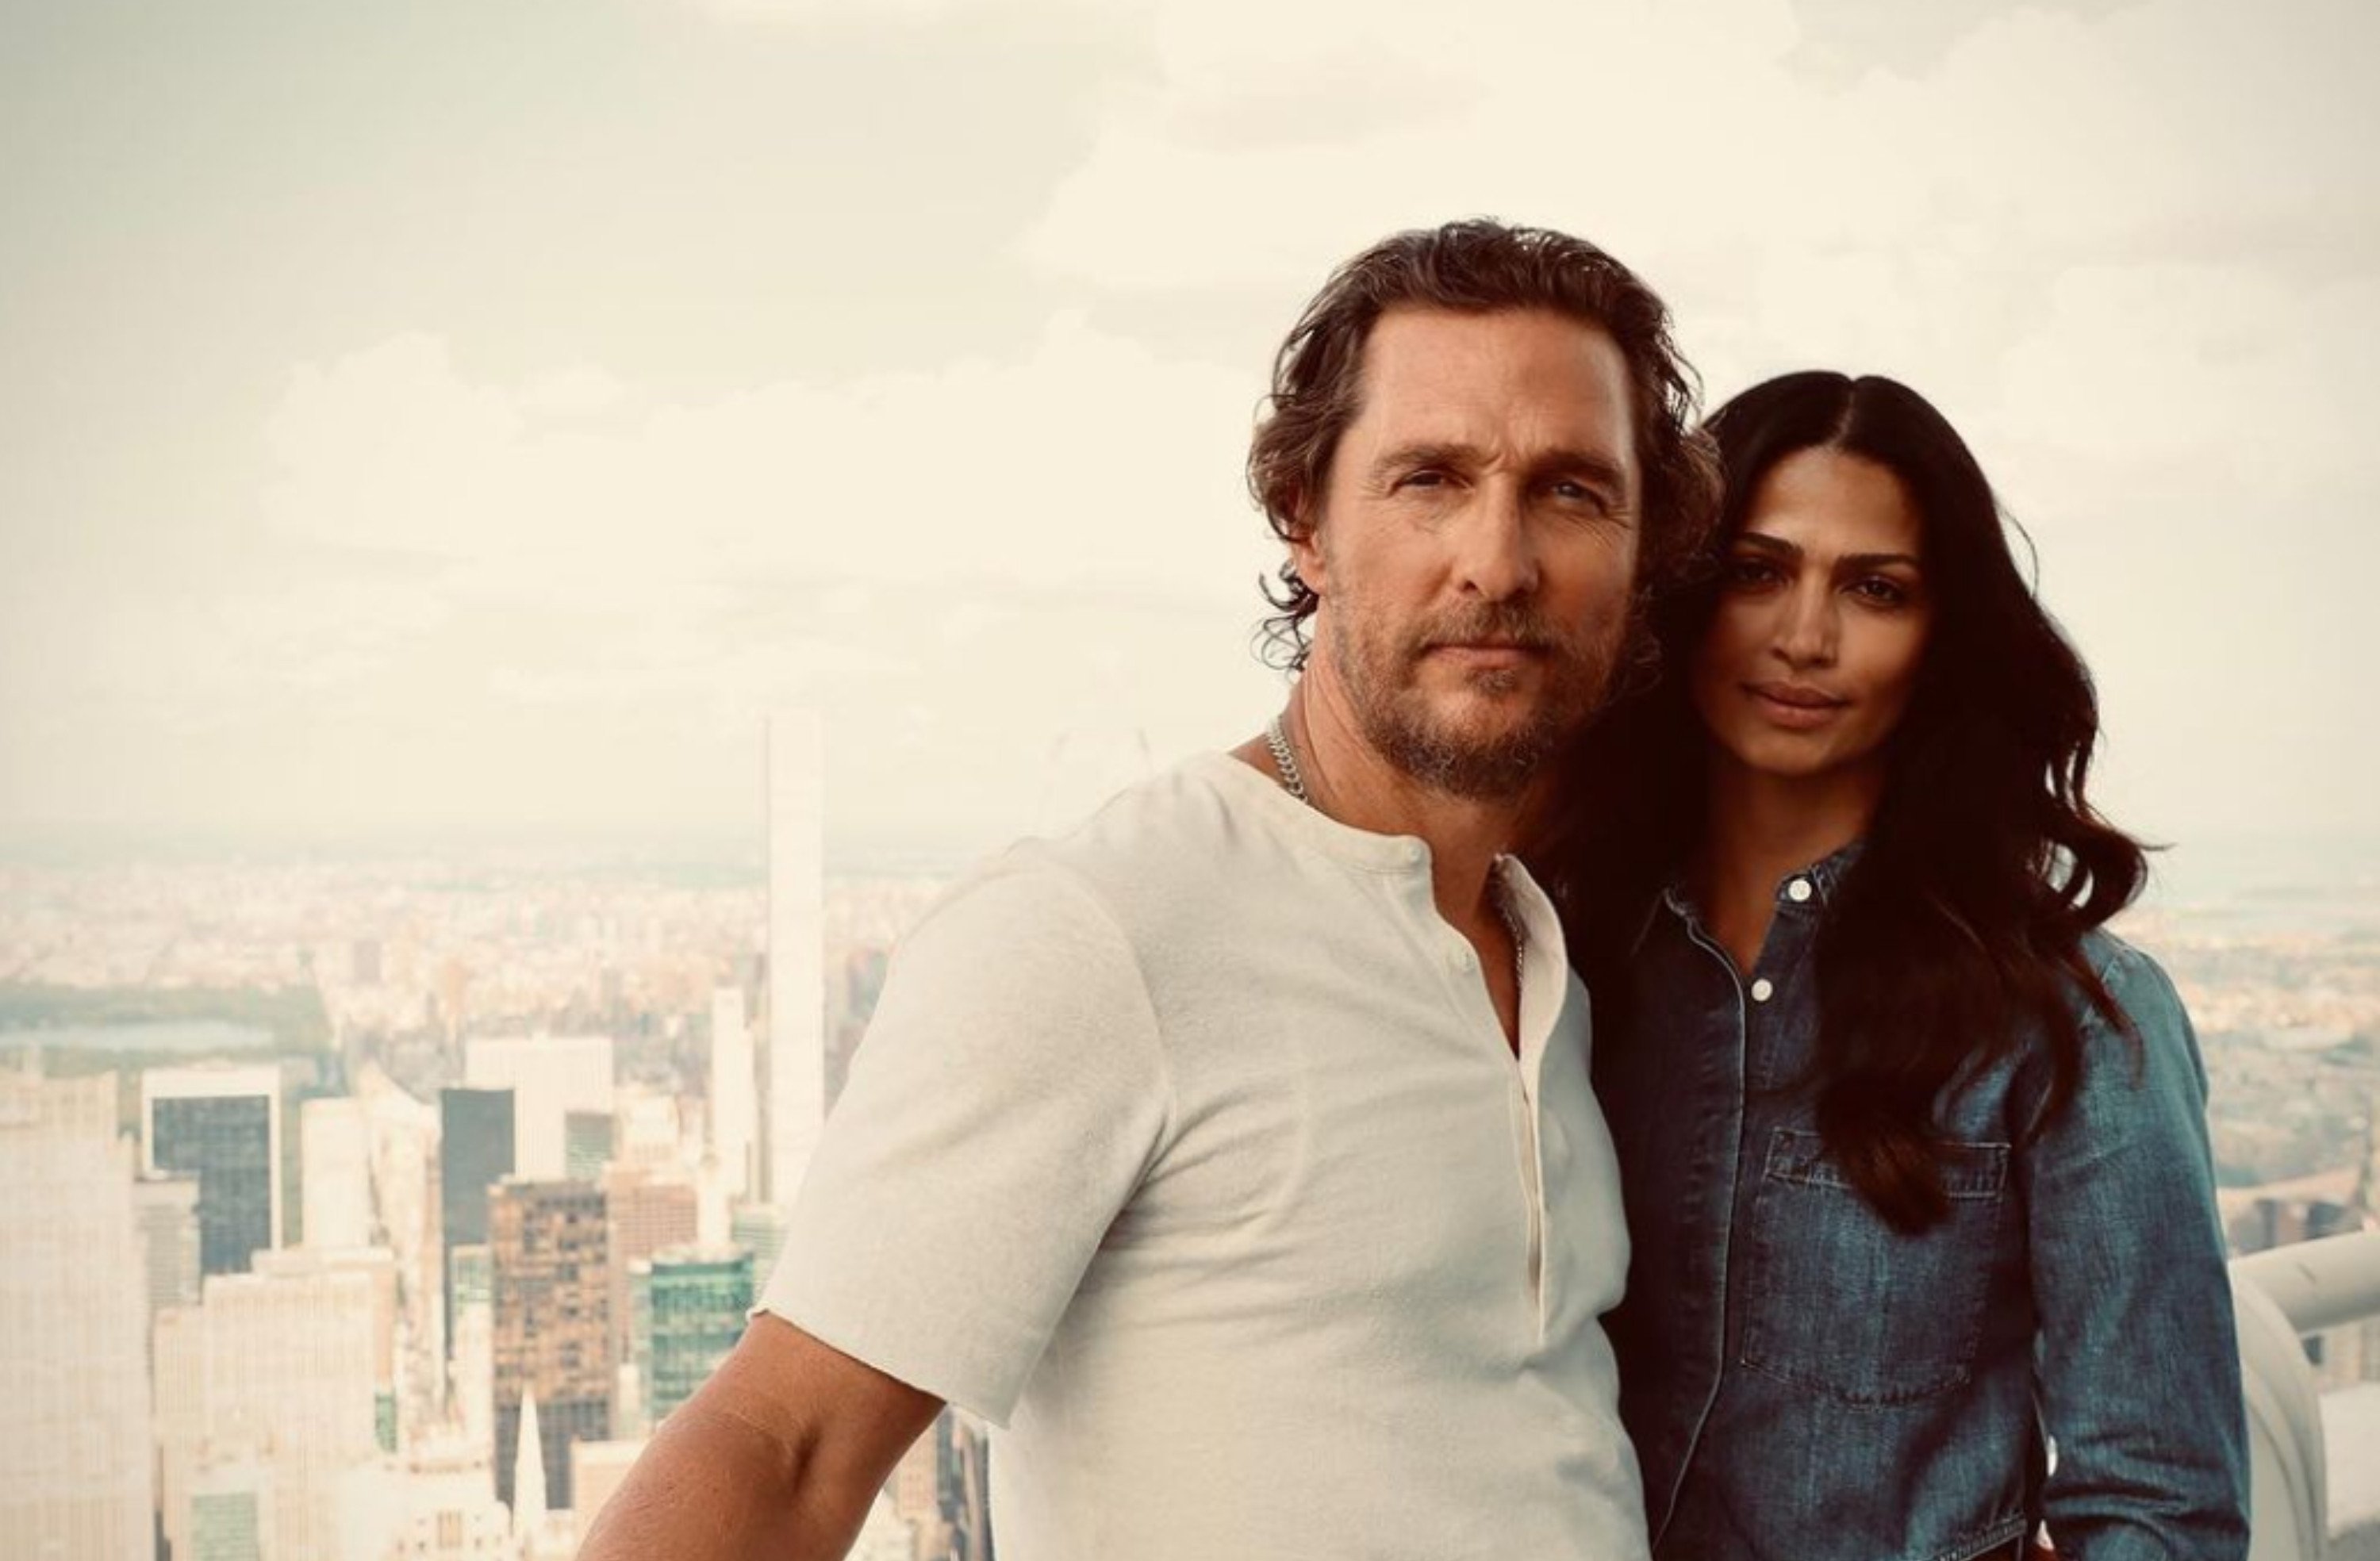 Matthew McConaughey and his wife Camila Alves have been married for over a decade. Photo: @camilamcconaughey/Instagram